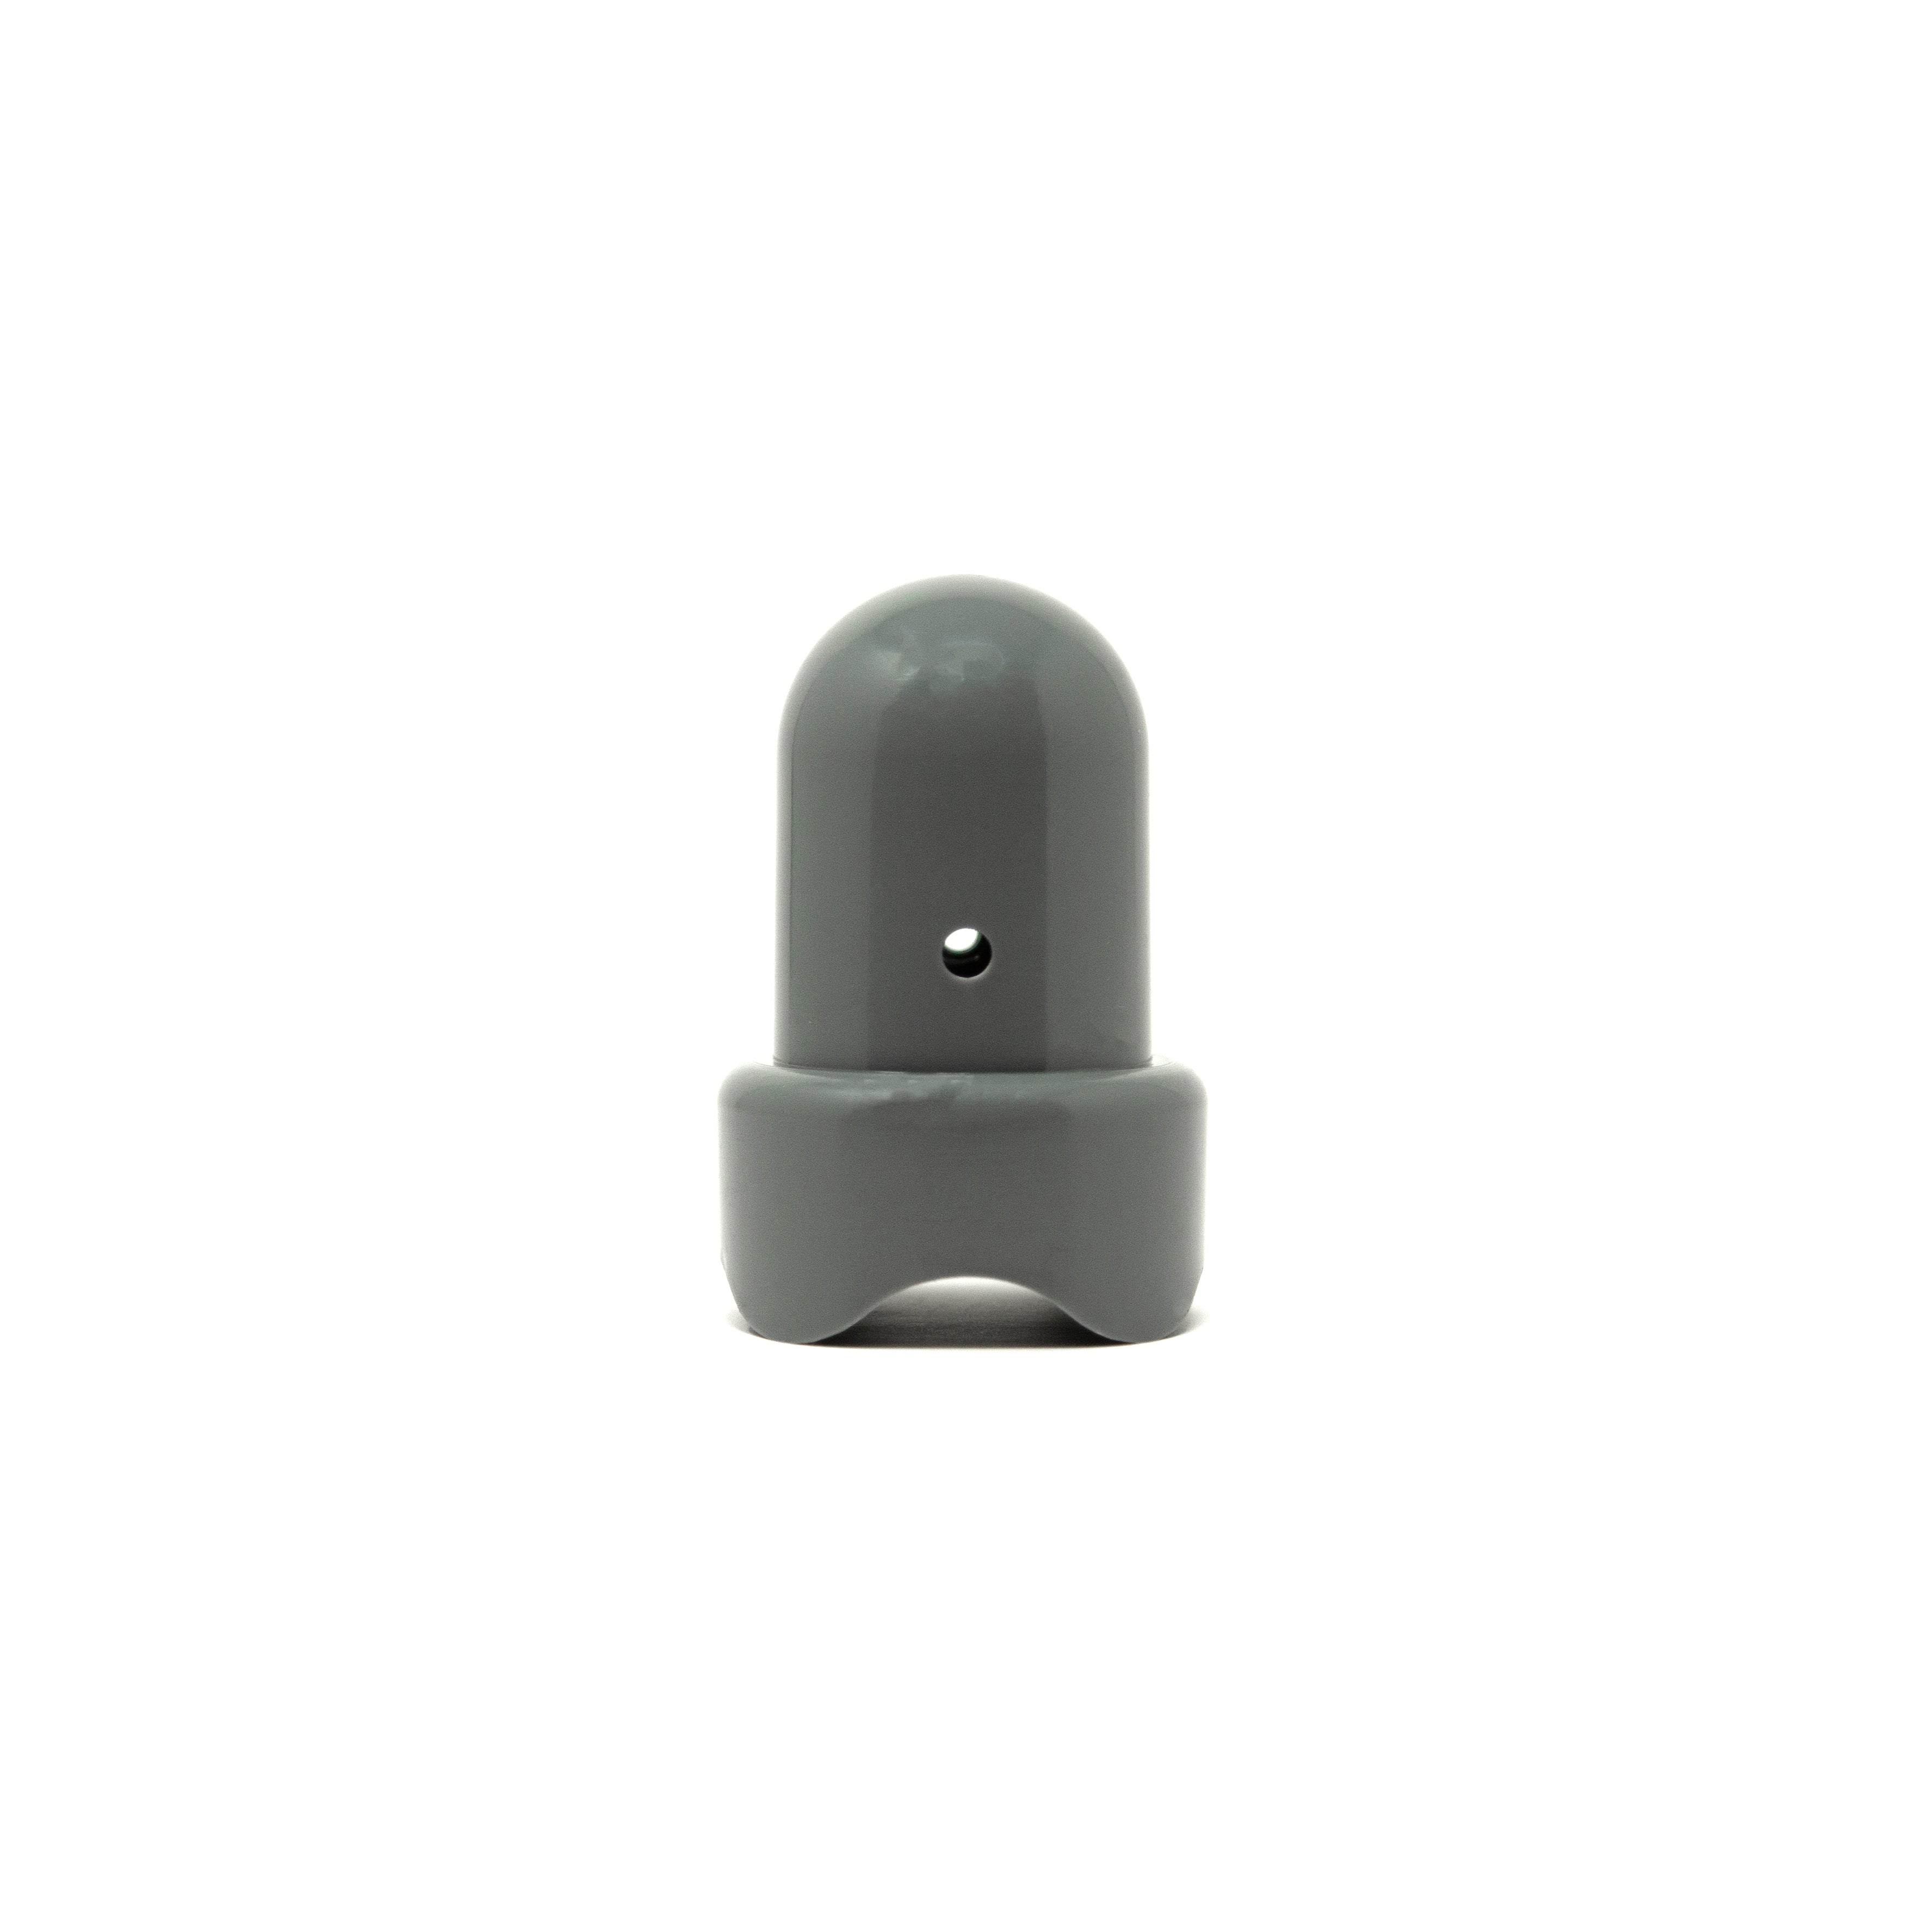 Gray pole cap with the round hole facing forward.